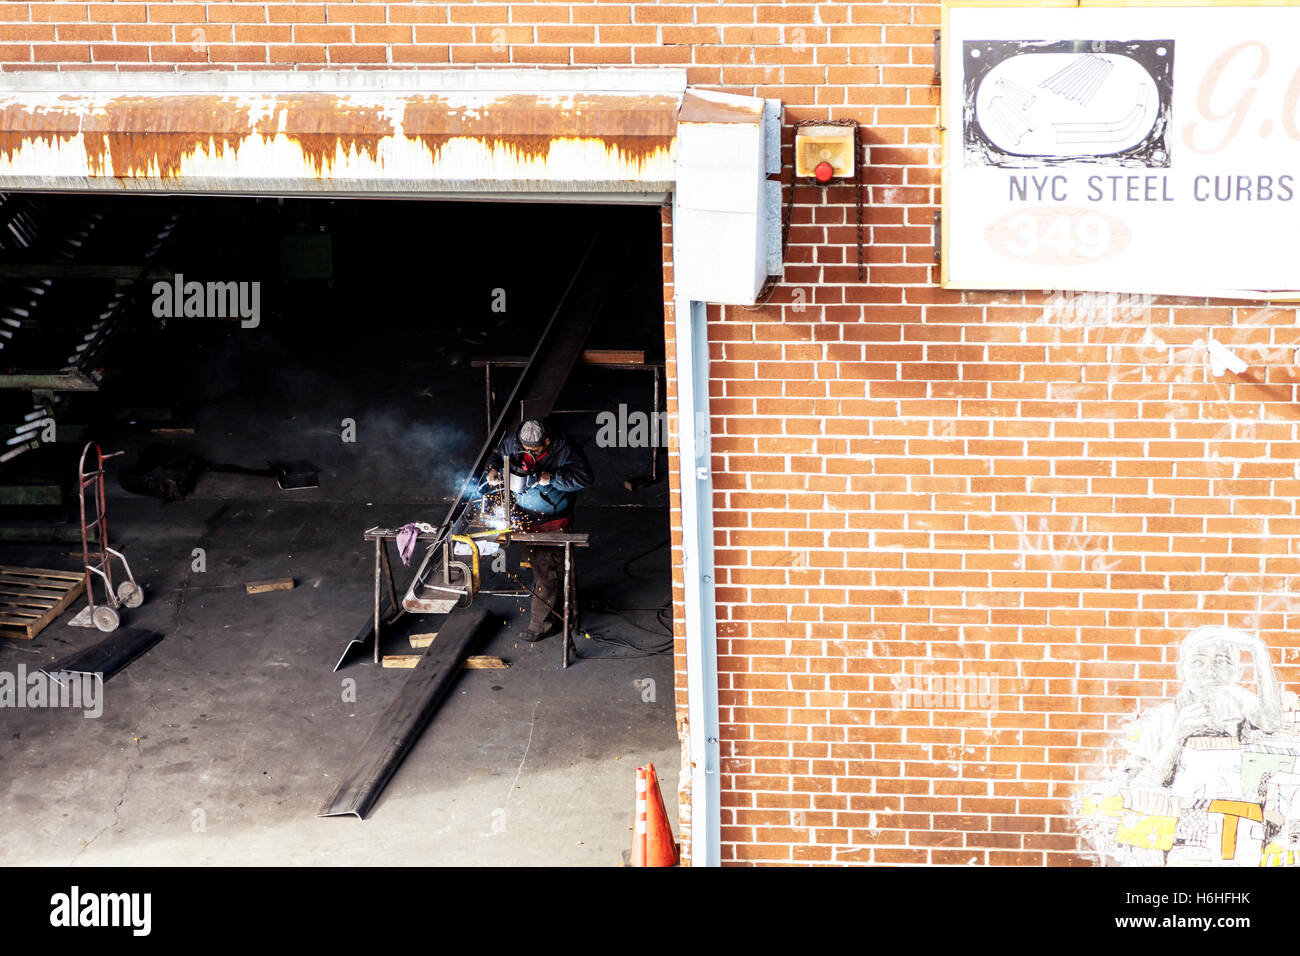 NEW-YORK - NOV 14: Worker welding steel in a steelsmith's shop in New-York, USA on November 14, 2012. Stock Photo